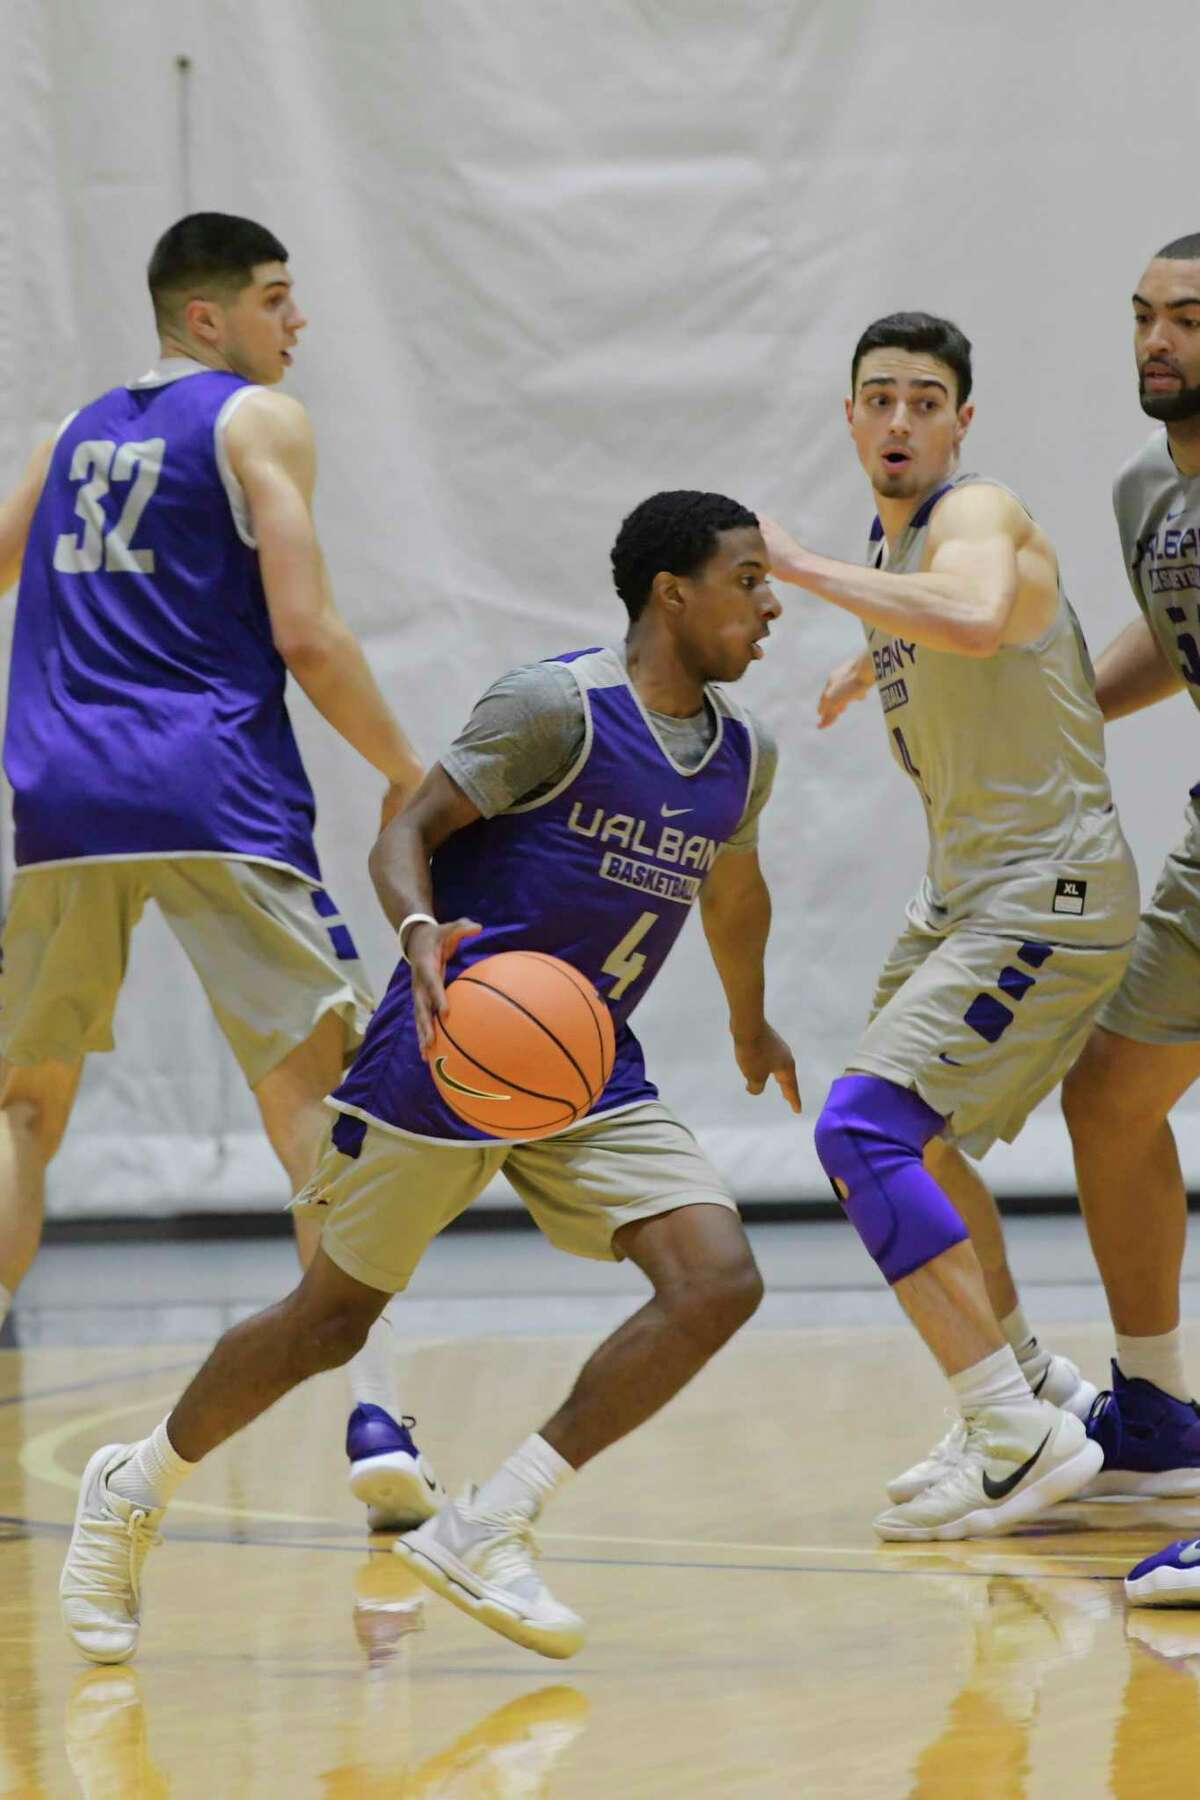 University at Albany men's basketball player, Reece Brooks, left, runs through drills with teammates during practice on Thursday, Oct. 11, 2018, in Albany, N.Y. (Paul Buckowski/Times Union)